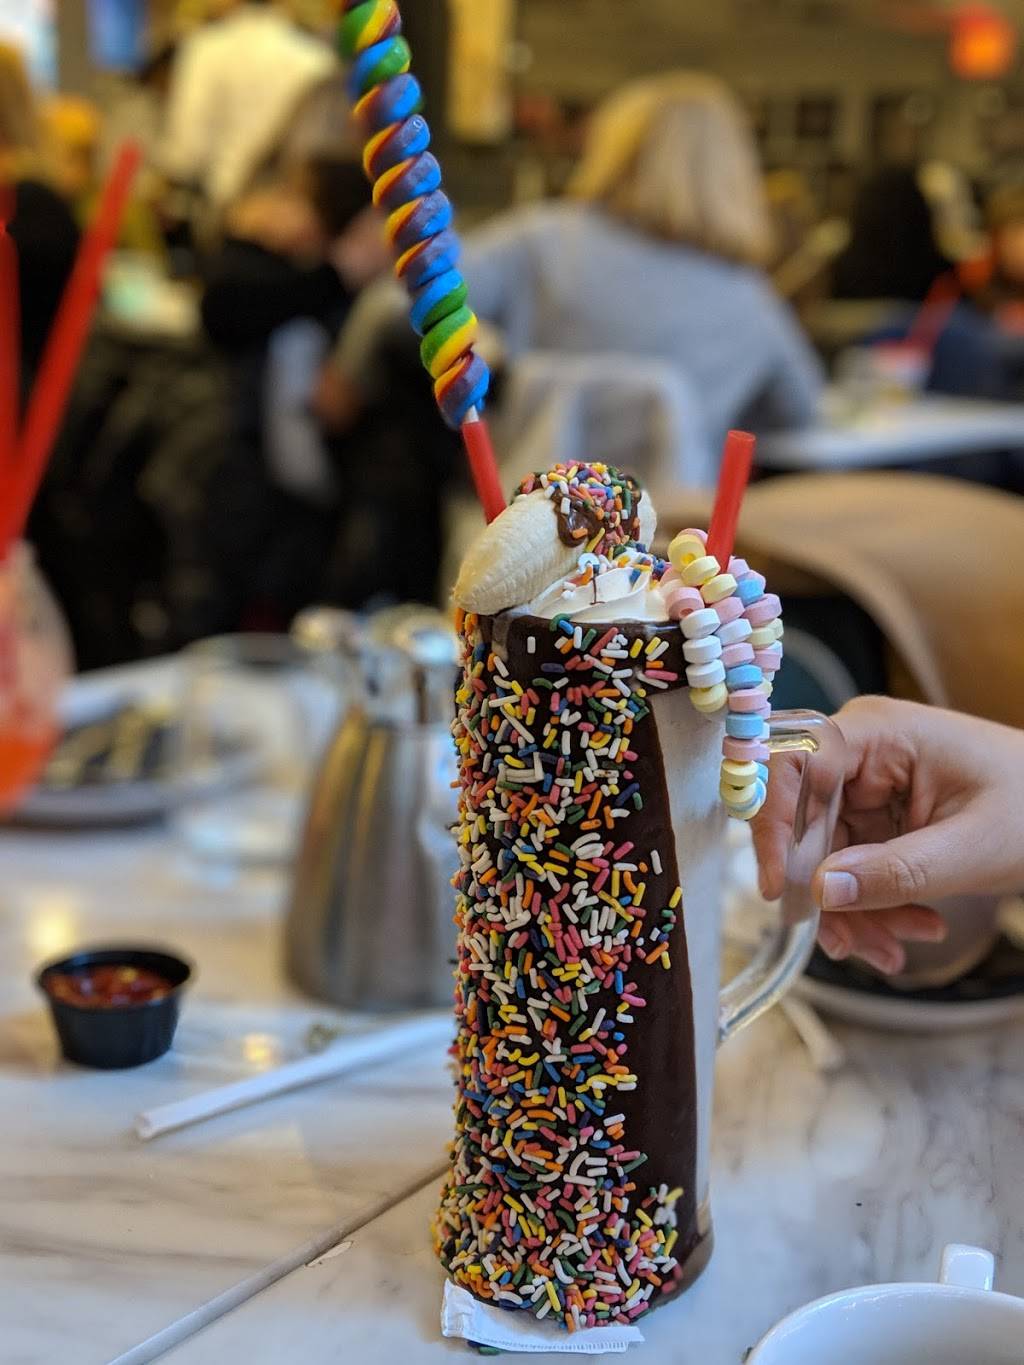 Sugar Factory Upper West Side | restaurant | 1991 Broadway, New York, NY 10023, USA | 2124148700 OR +1 212-414-8700